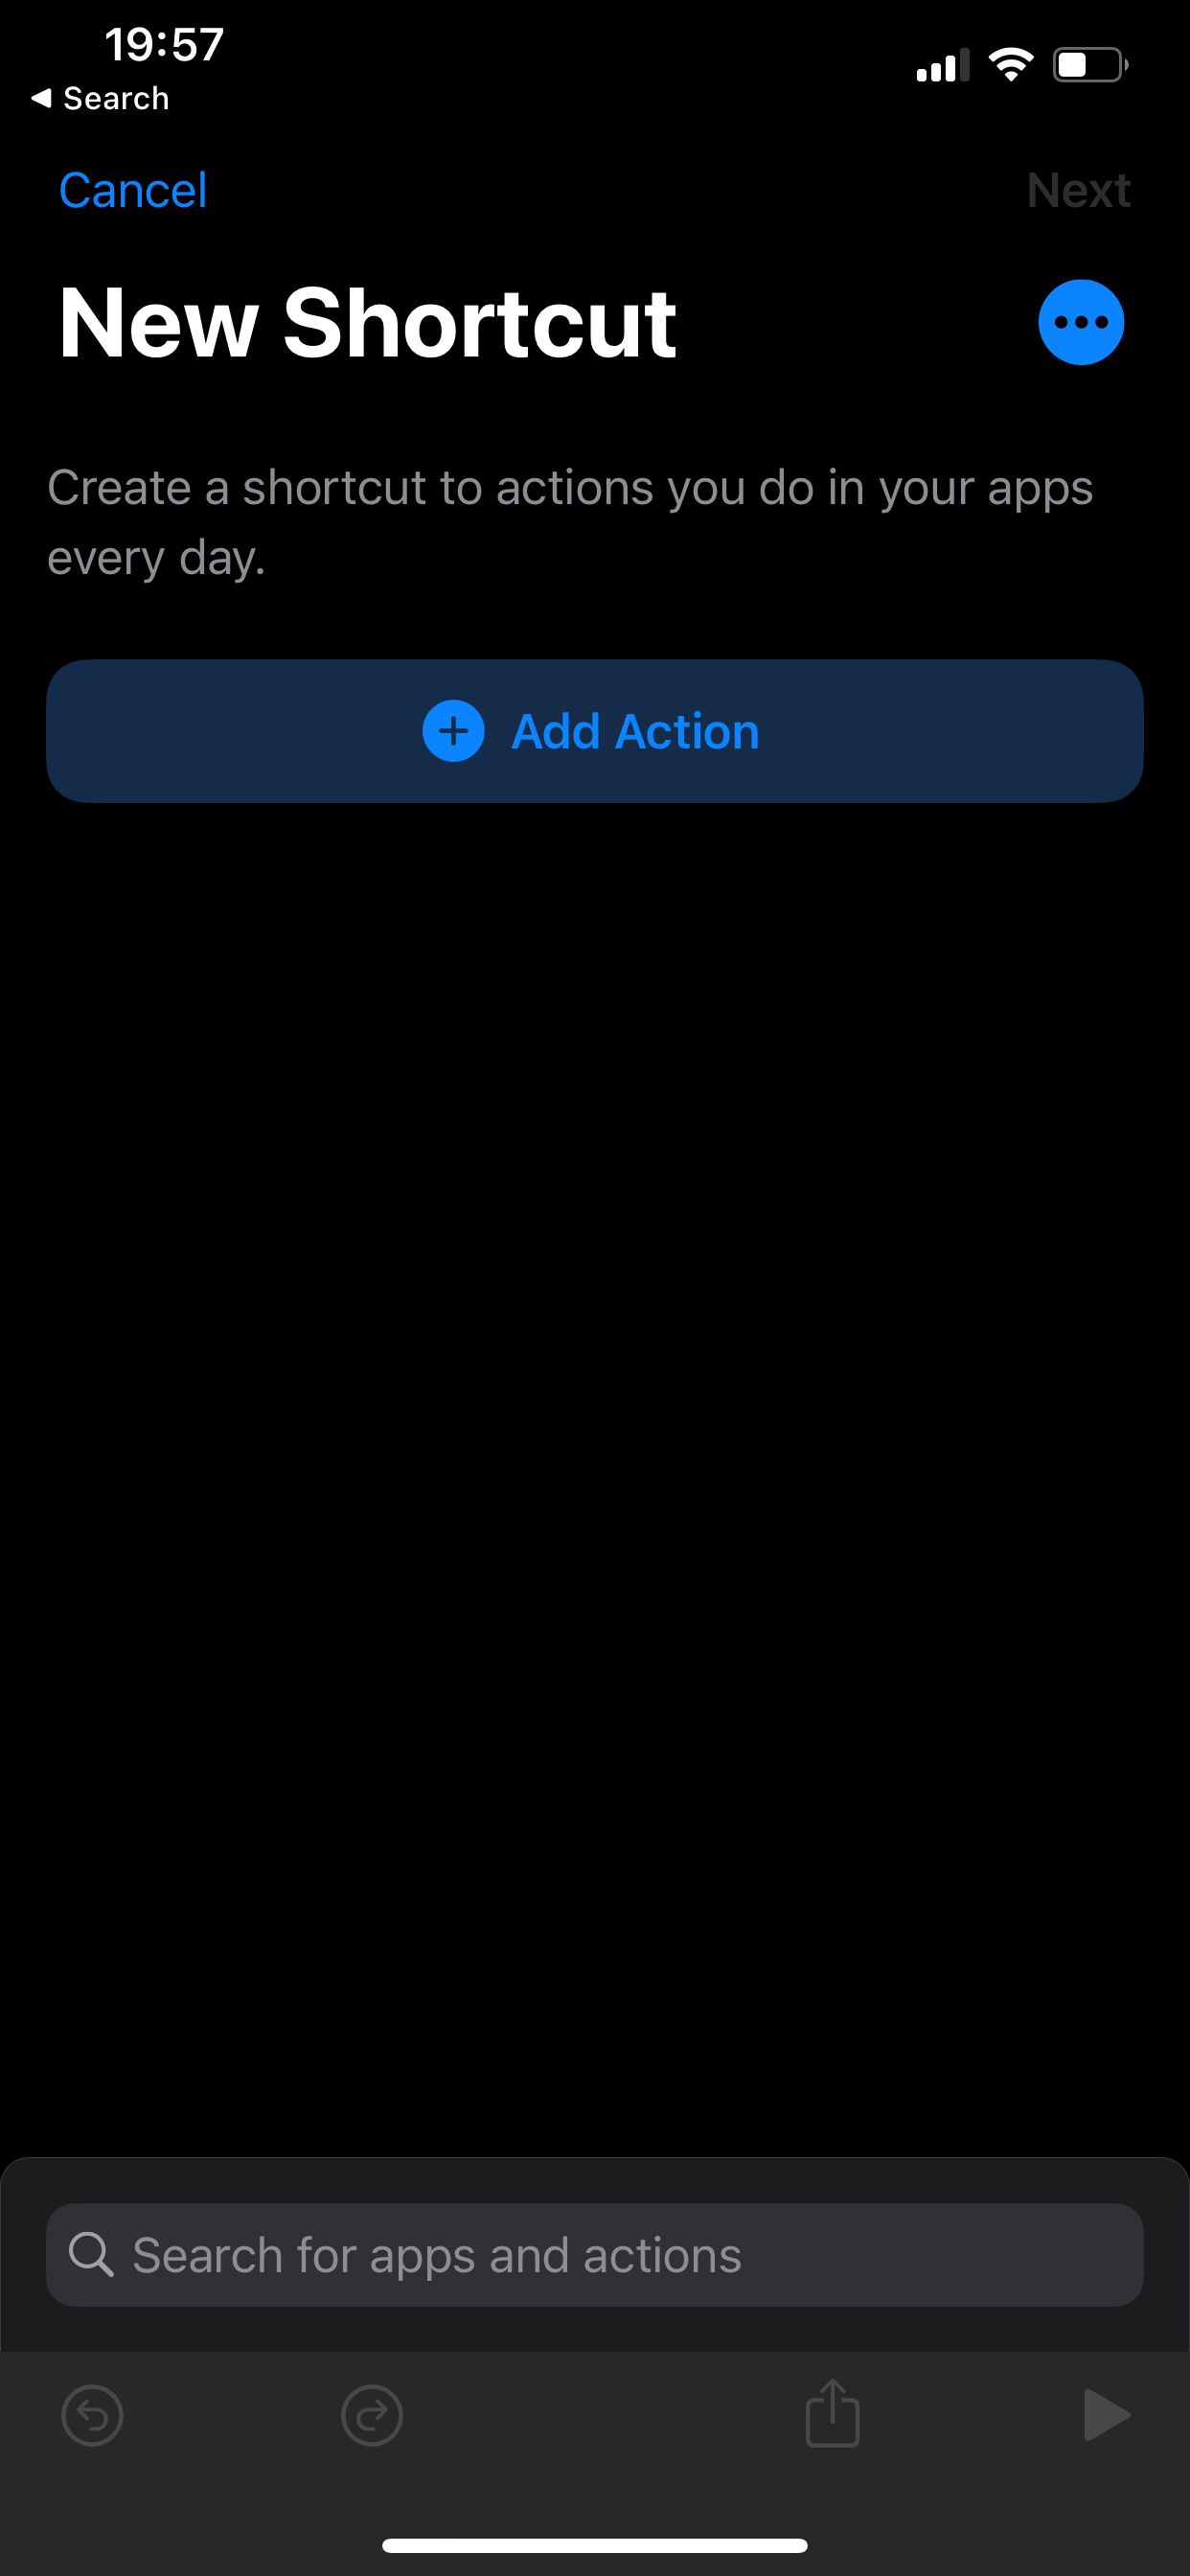 The Add Action button from the screen where you create a new shortcut